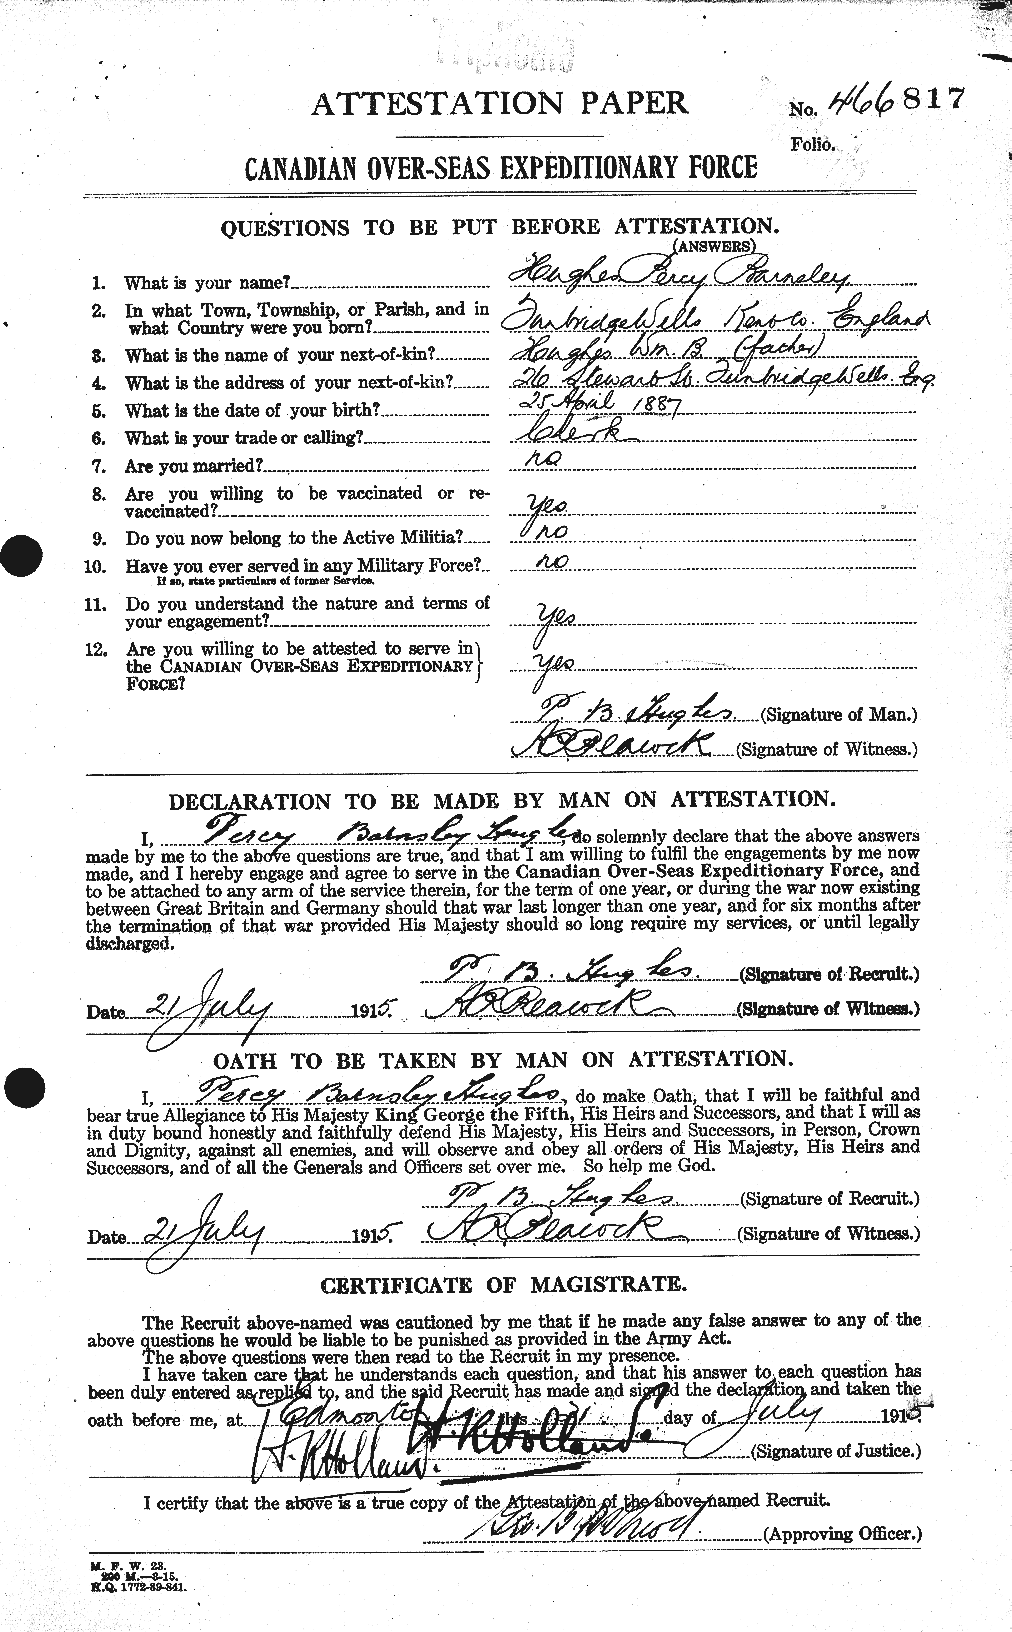 Personnel Records of the First World War - CEF 404157a